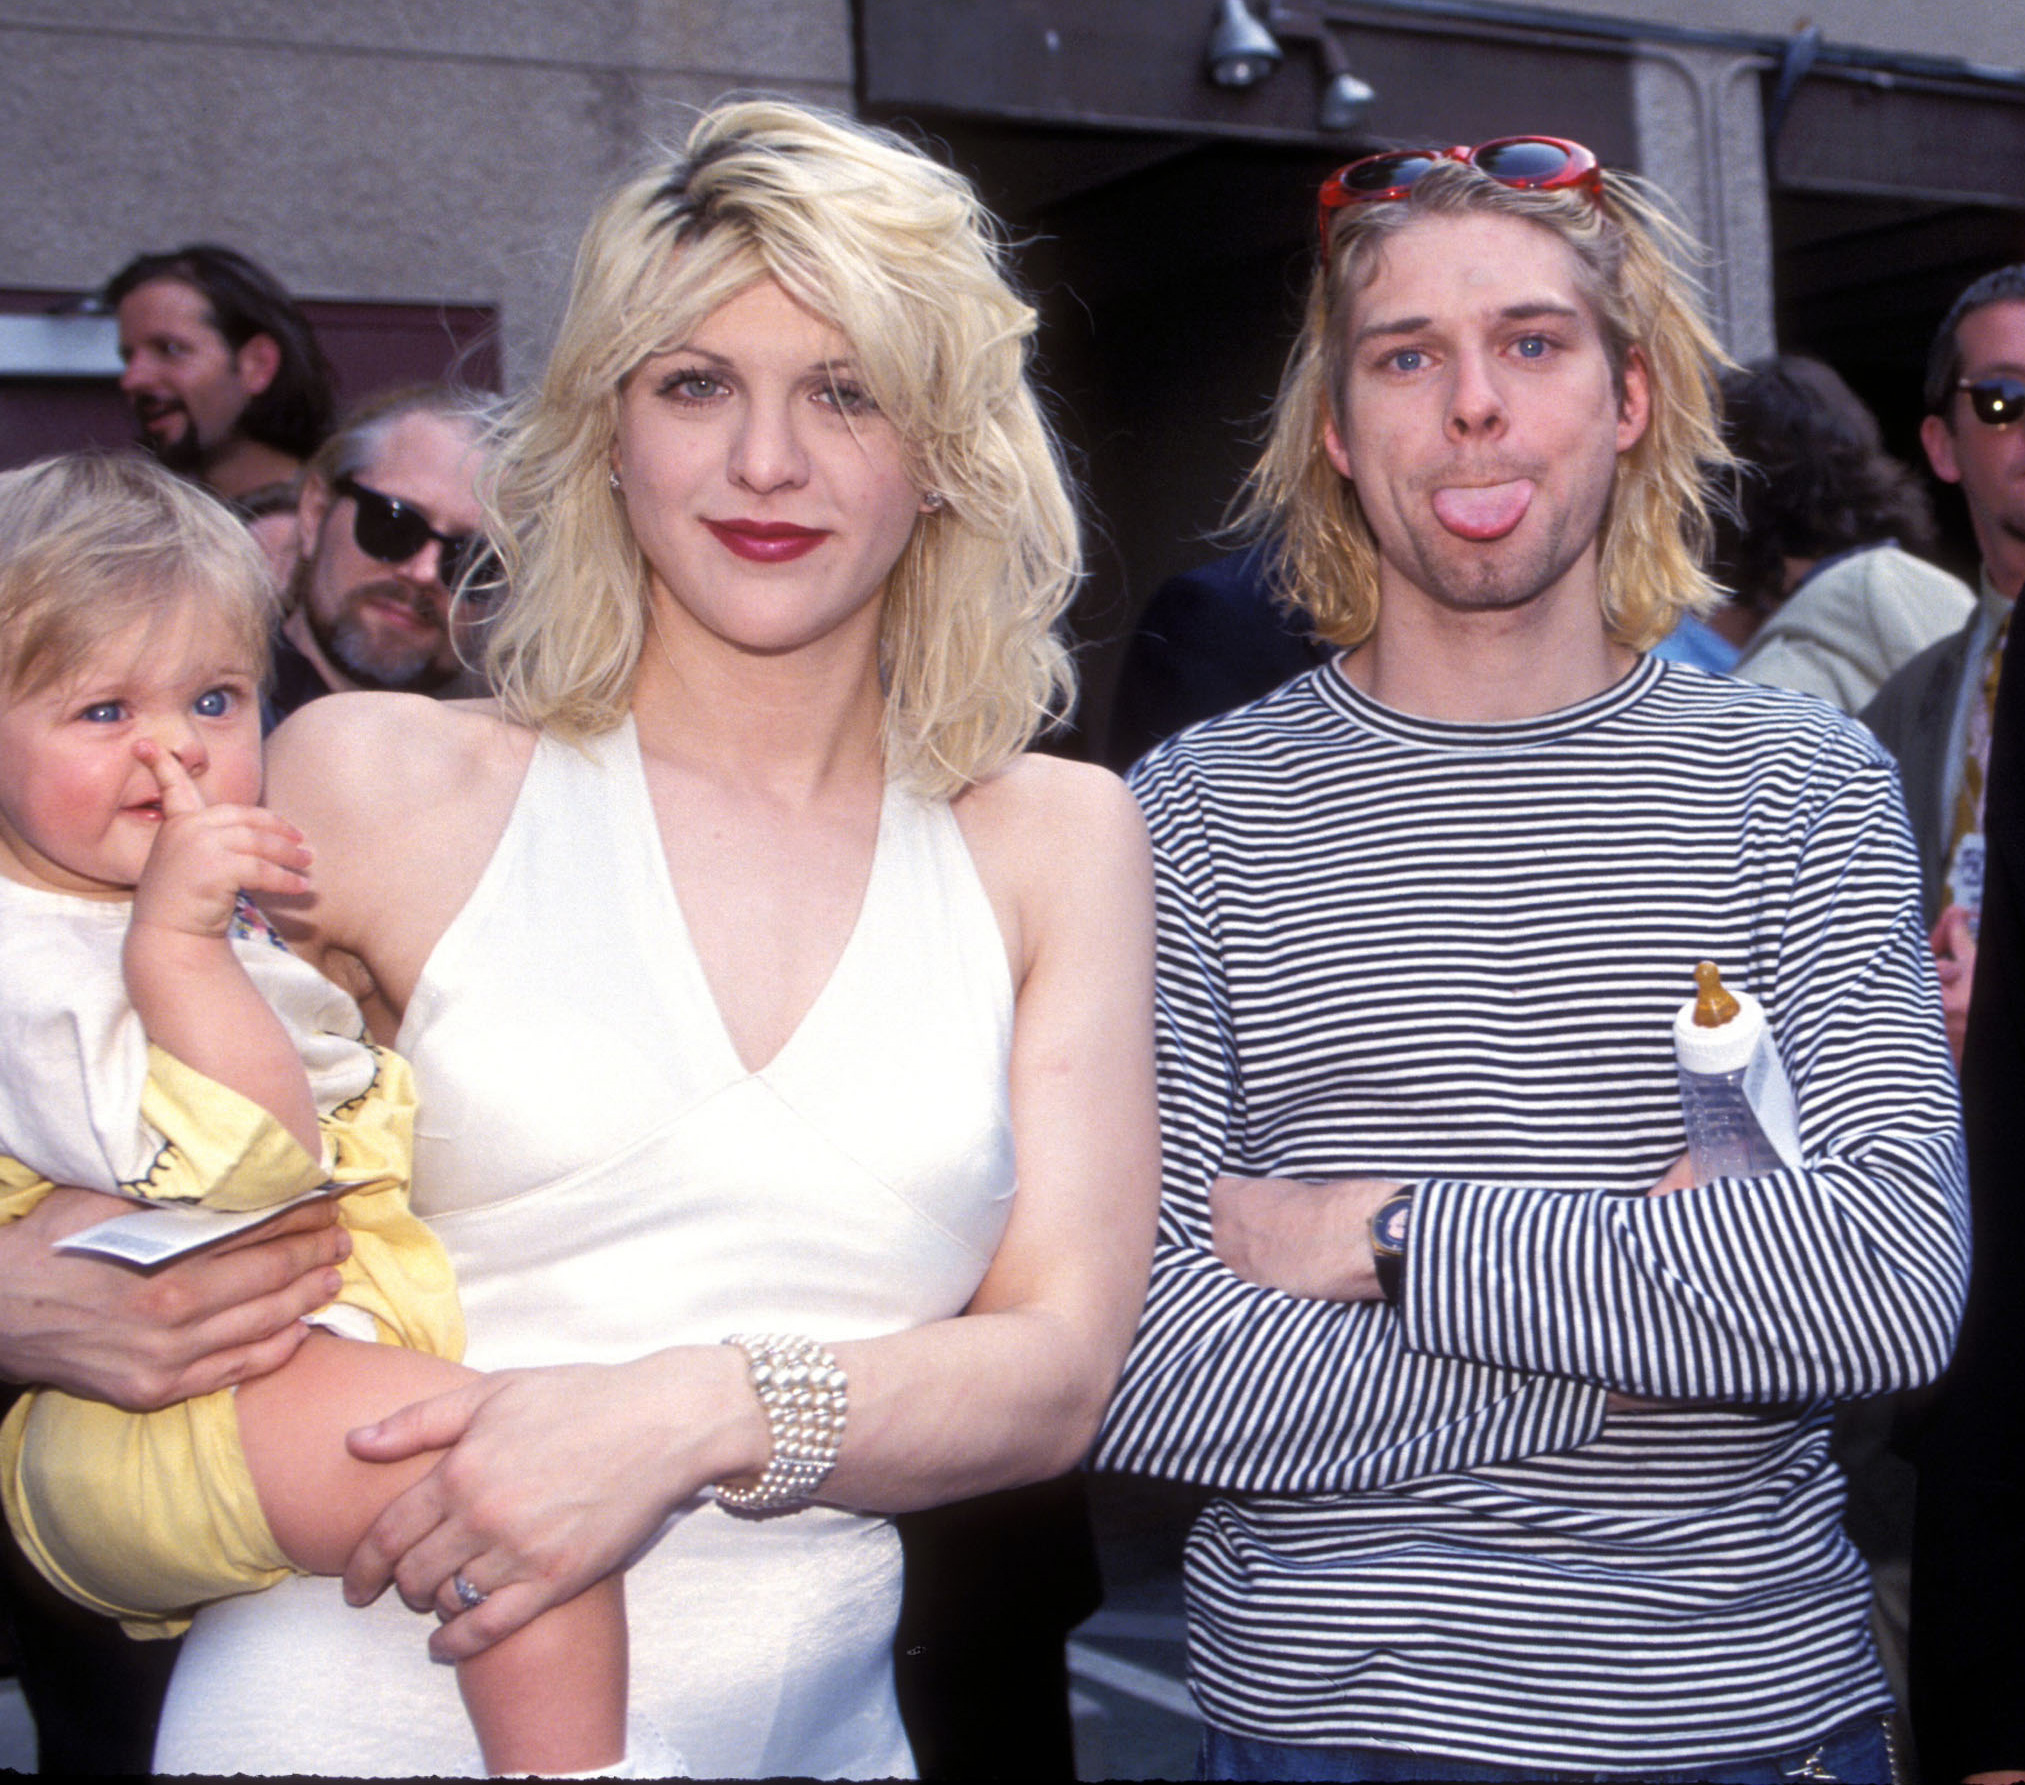 <p><span>In February 1992, Hole singer Courtney Love married Nirvana frontman Kurt Cobain. Barely two years later on April 5, 1994, Kurt died by suicide at their home in Seattle, Washington, leaving behind Courtney and their 19-month-old daughter, Frances Bean Cobain. His body was found by an electrician working on the property three days later.</span></p>